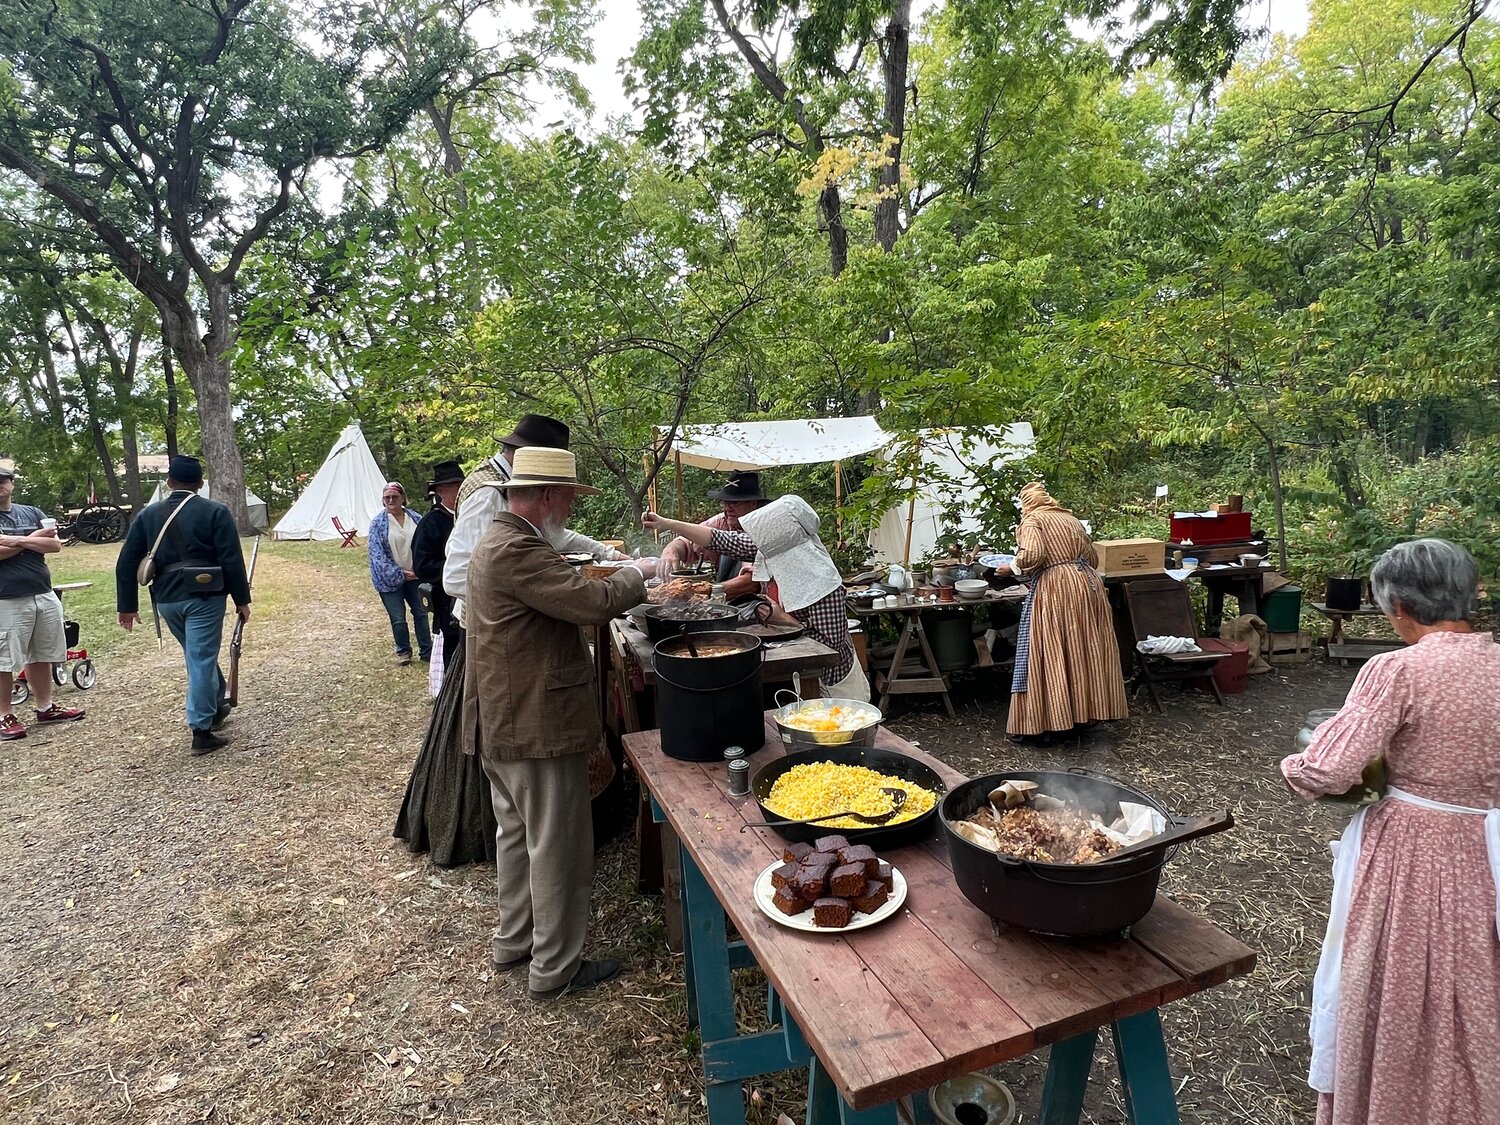 Spencer’s Kitchen – overseen by organizer and Hastings historian Spencer Johnson – put on a feast Sunday afternoon. Johnson’s efforts were fit to keep a Civil War army and event volunteers on their feet.